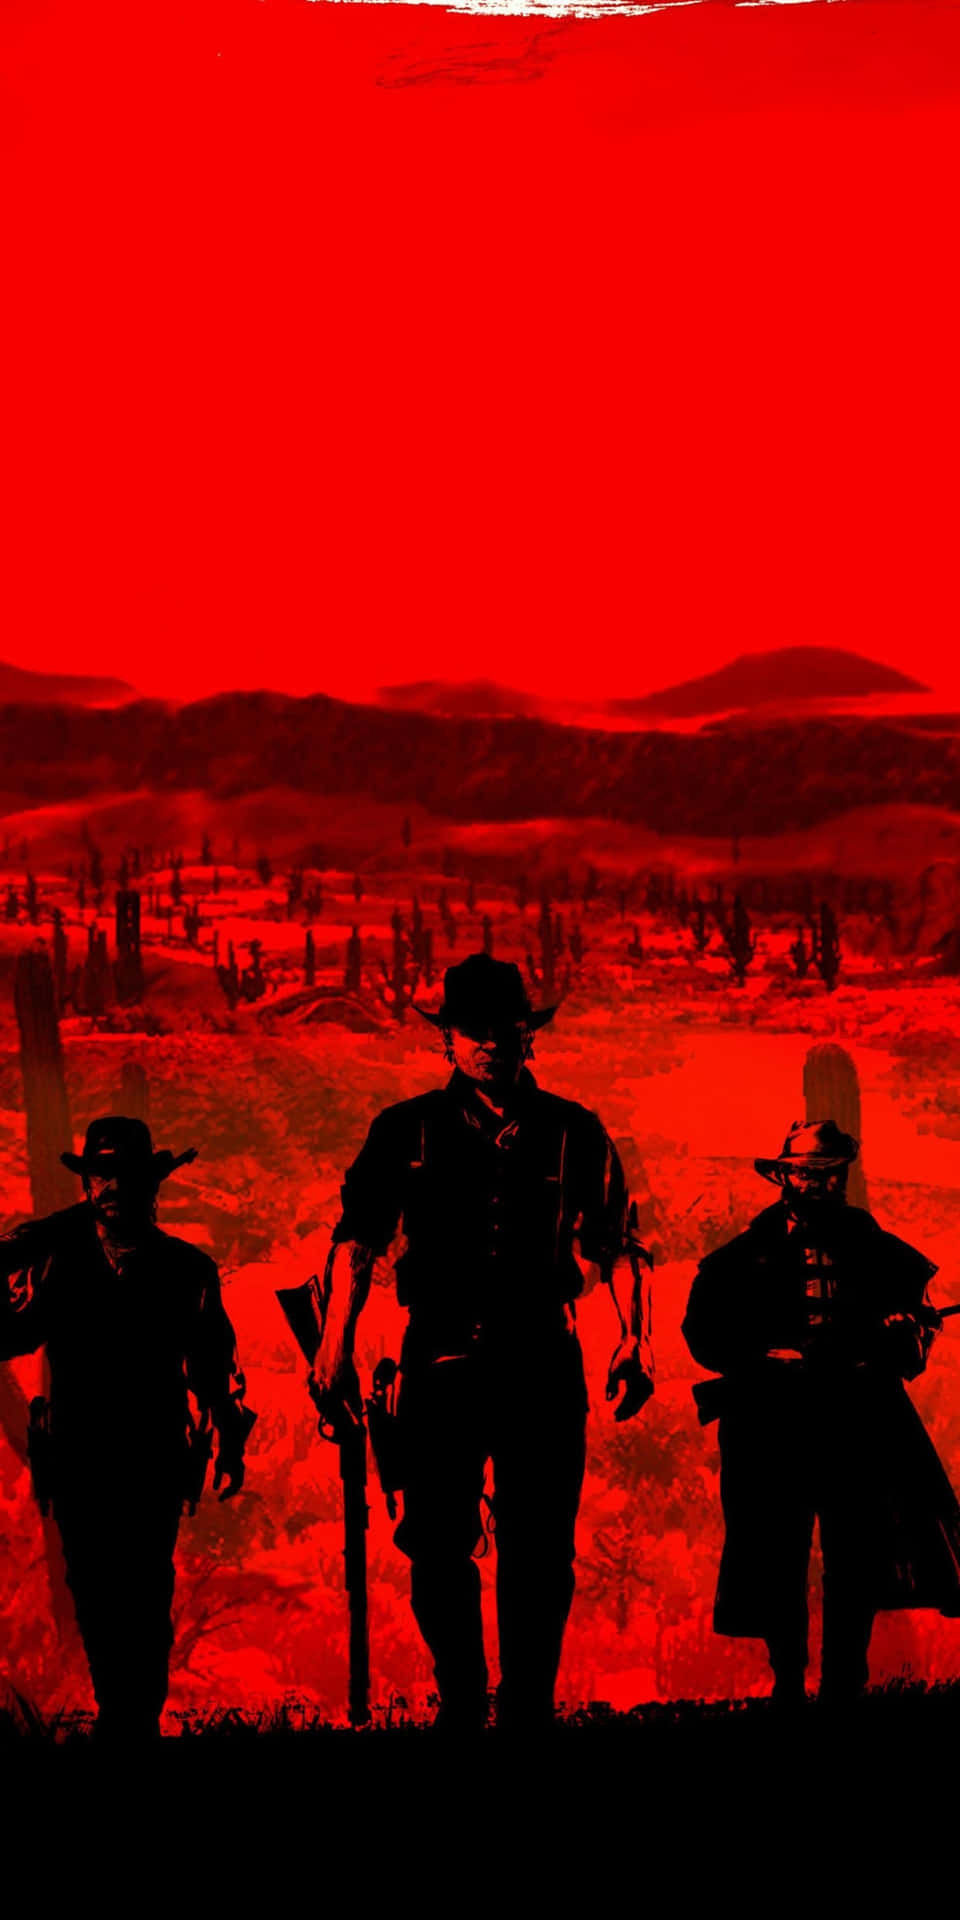 Pixel 3 Red Dead Redemption 2 Background Red Themed Poster Of Cowboys